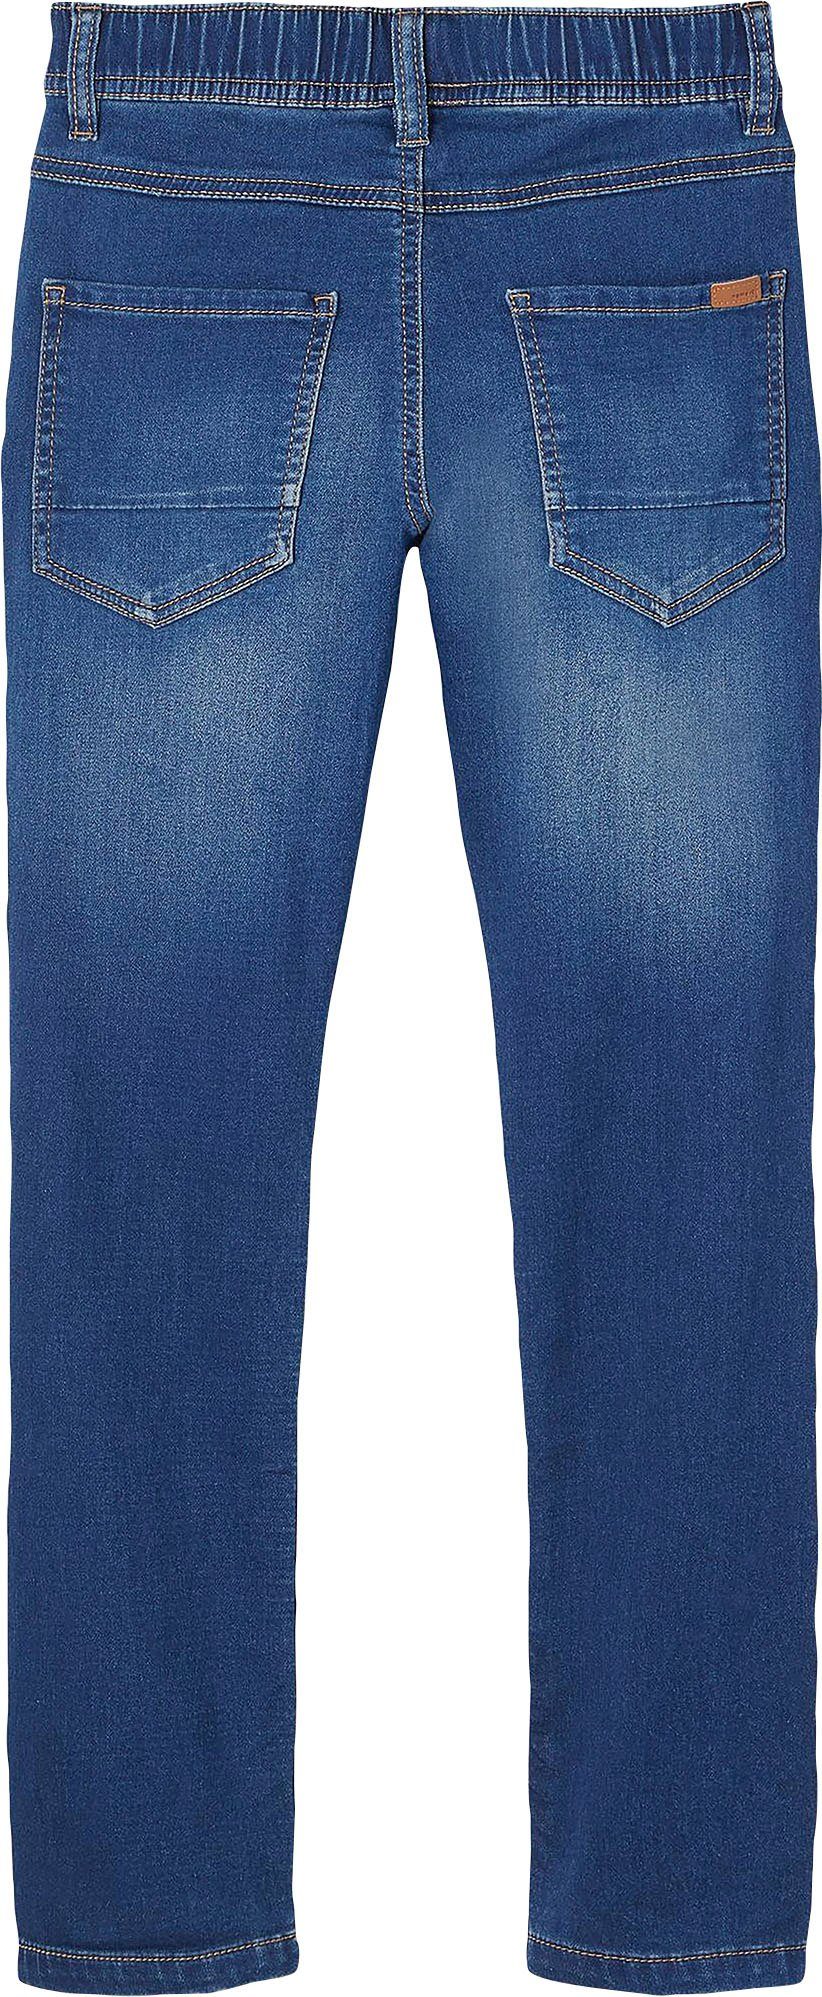 Stretch-Jeans NKMROBIN DNMTHAYERS 3454 It Name